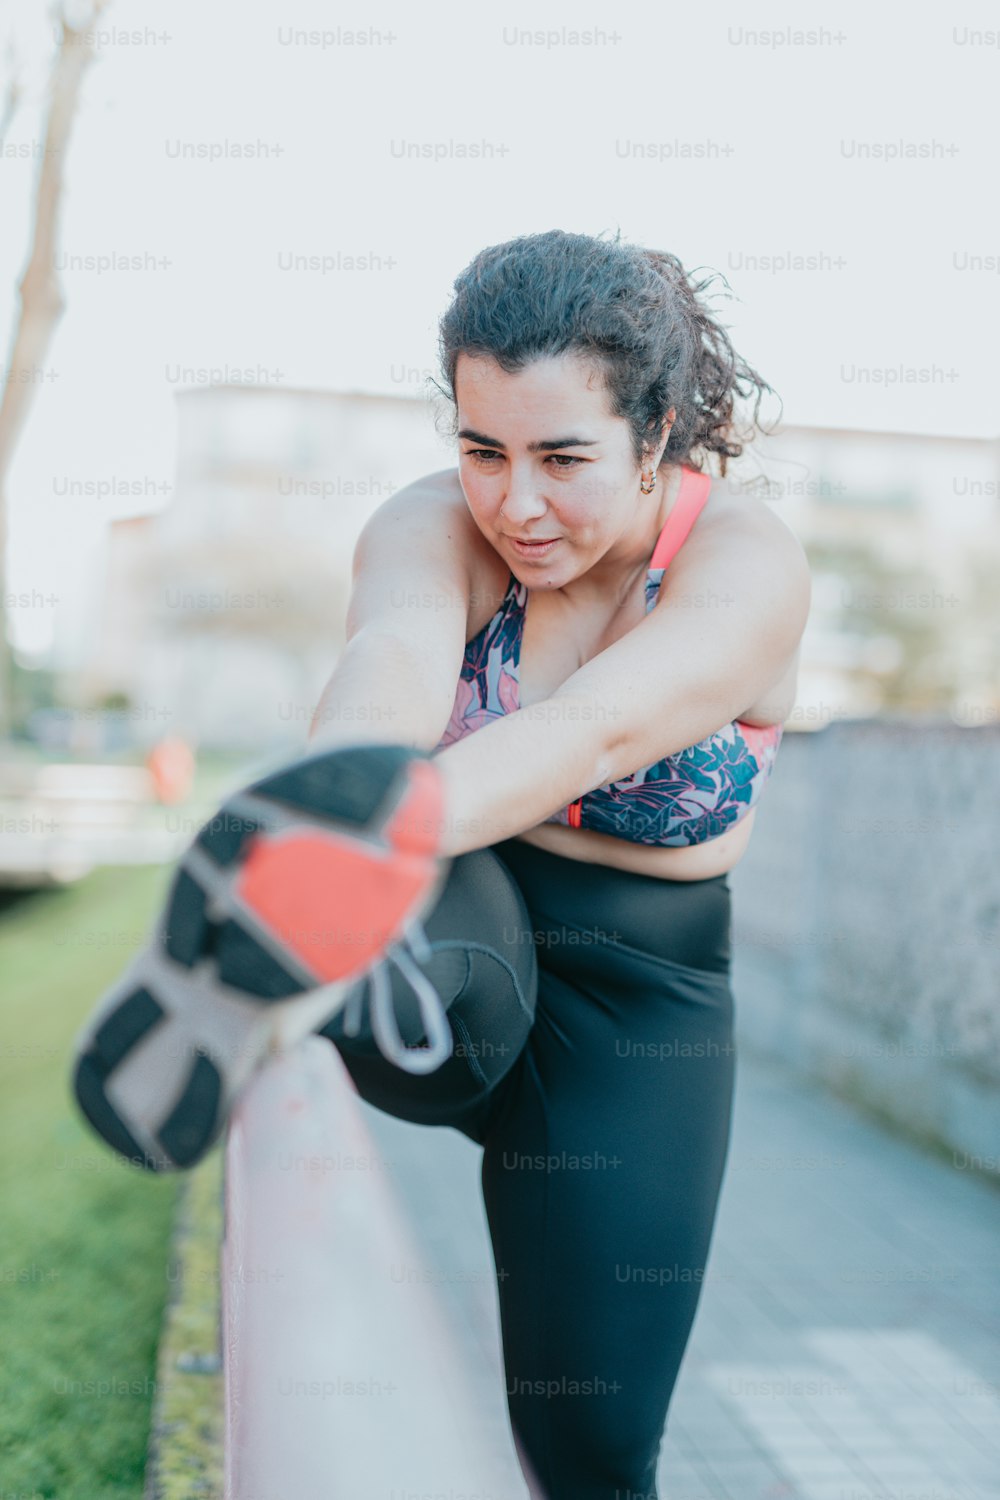 A woman in a sports bra top leaning against a fence photo – Working out  Image on Unsplash